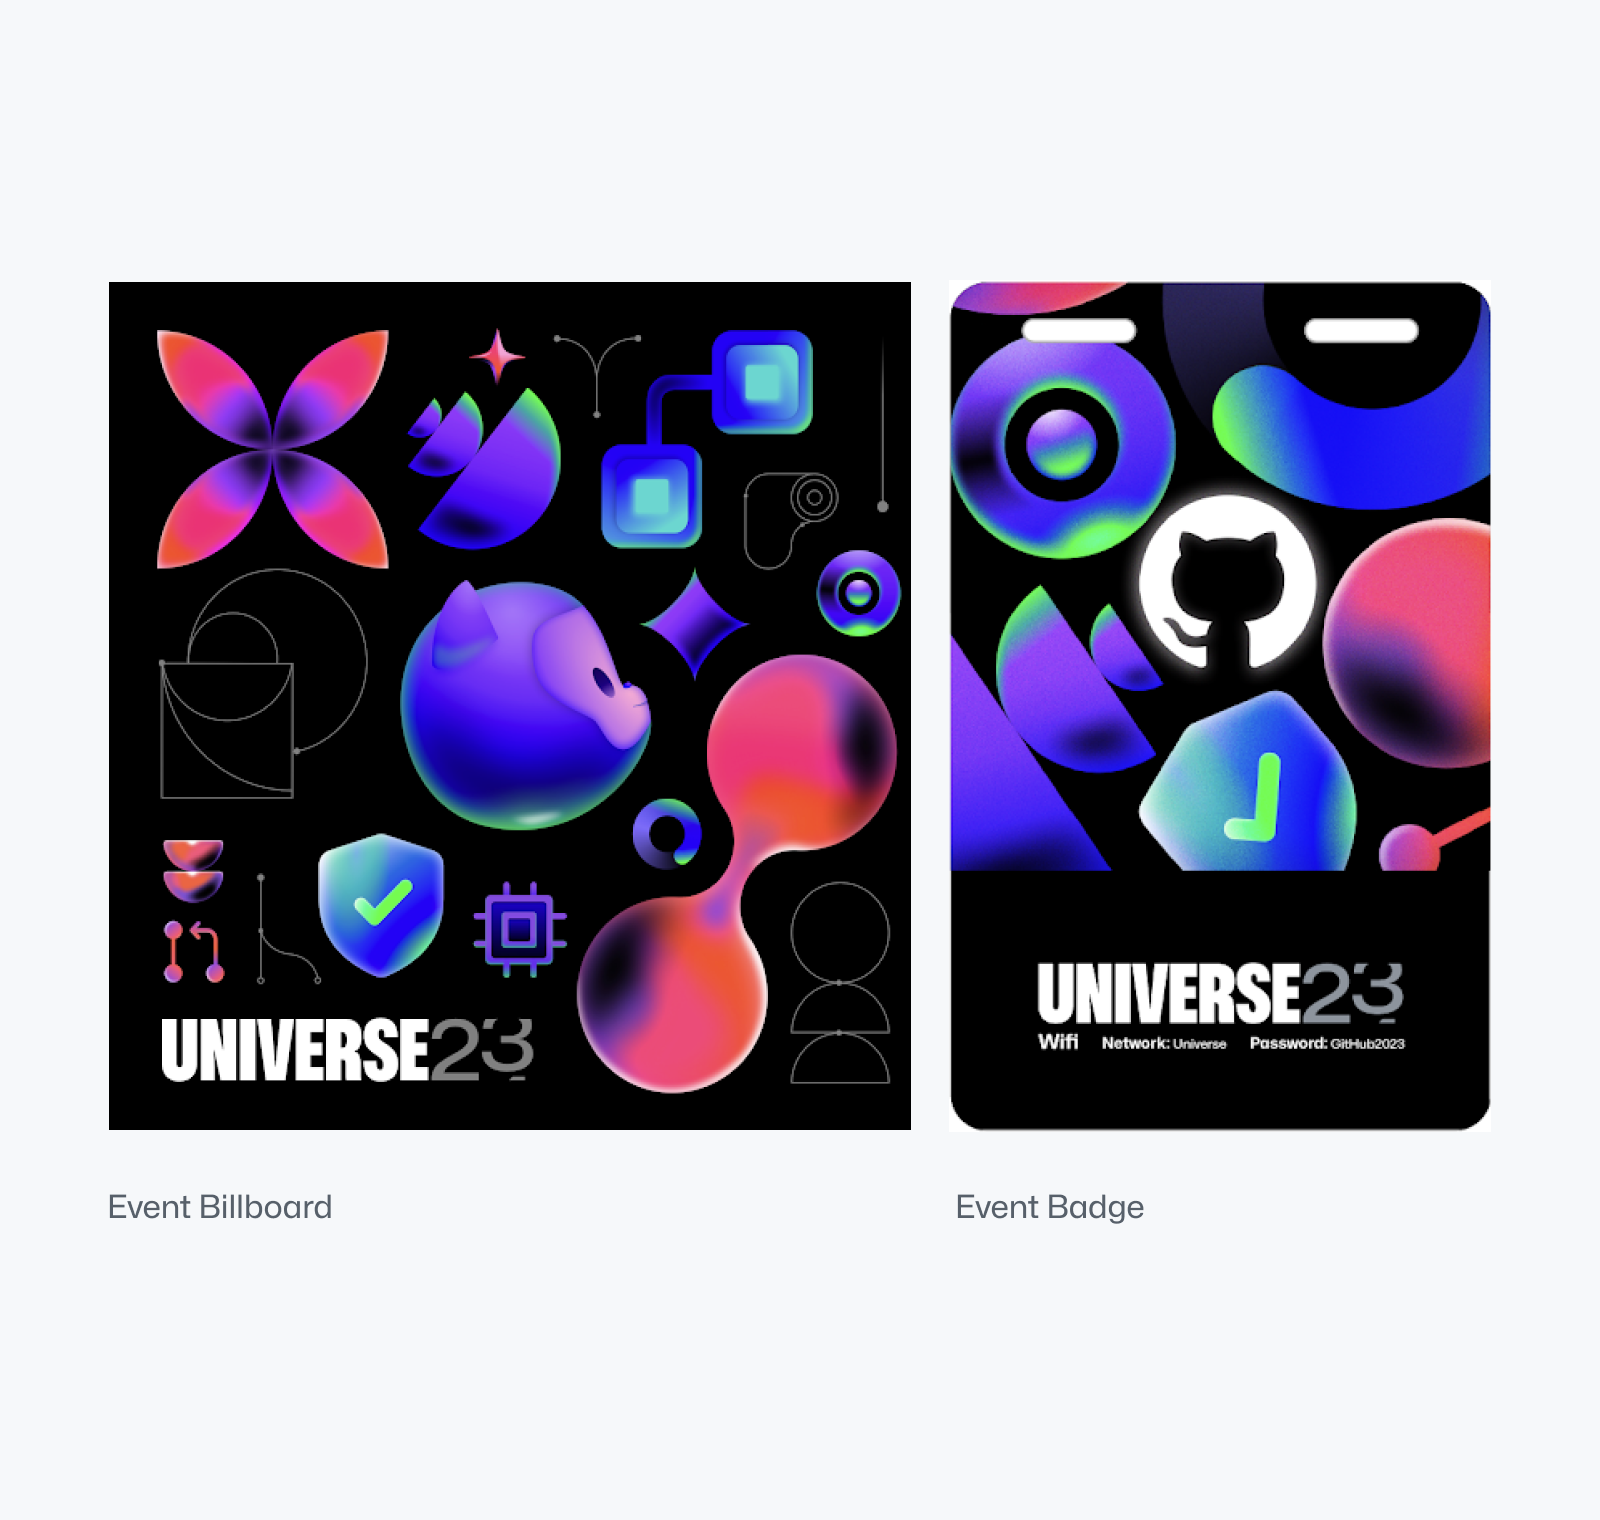 Two rectangular assets side by side: a Universe billboard and an event badge, both featuring colorful illustrations